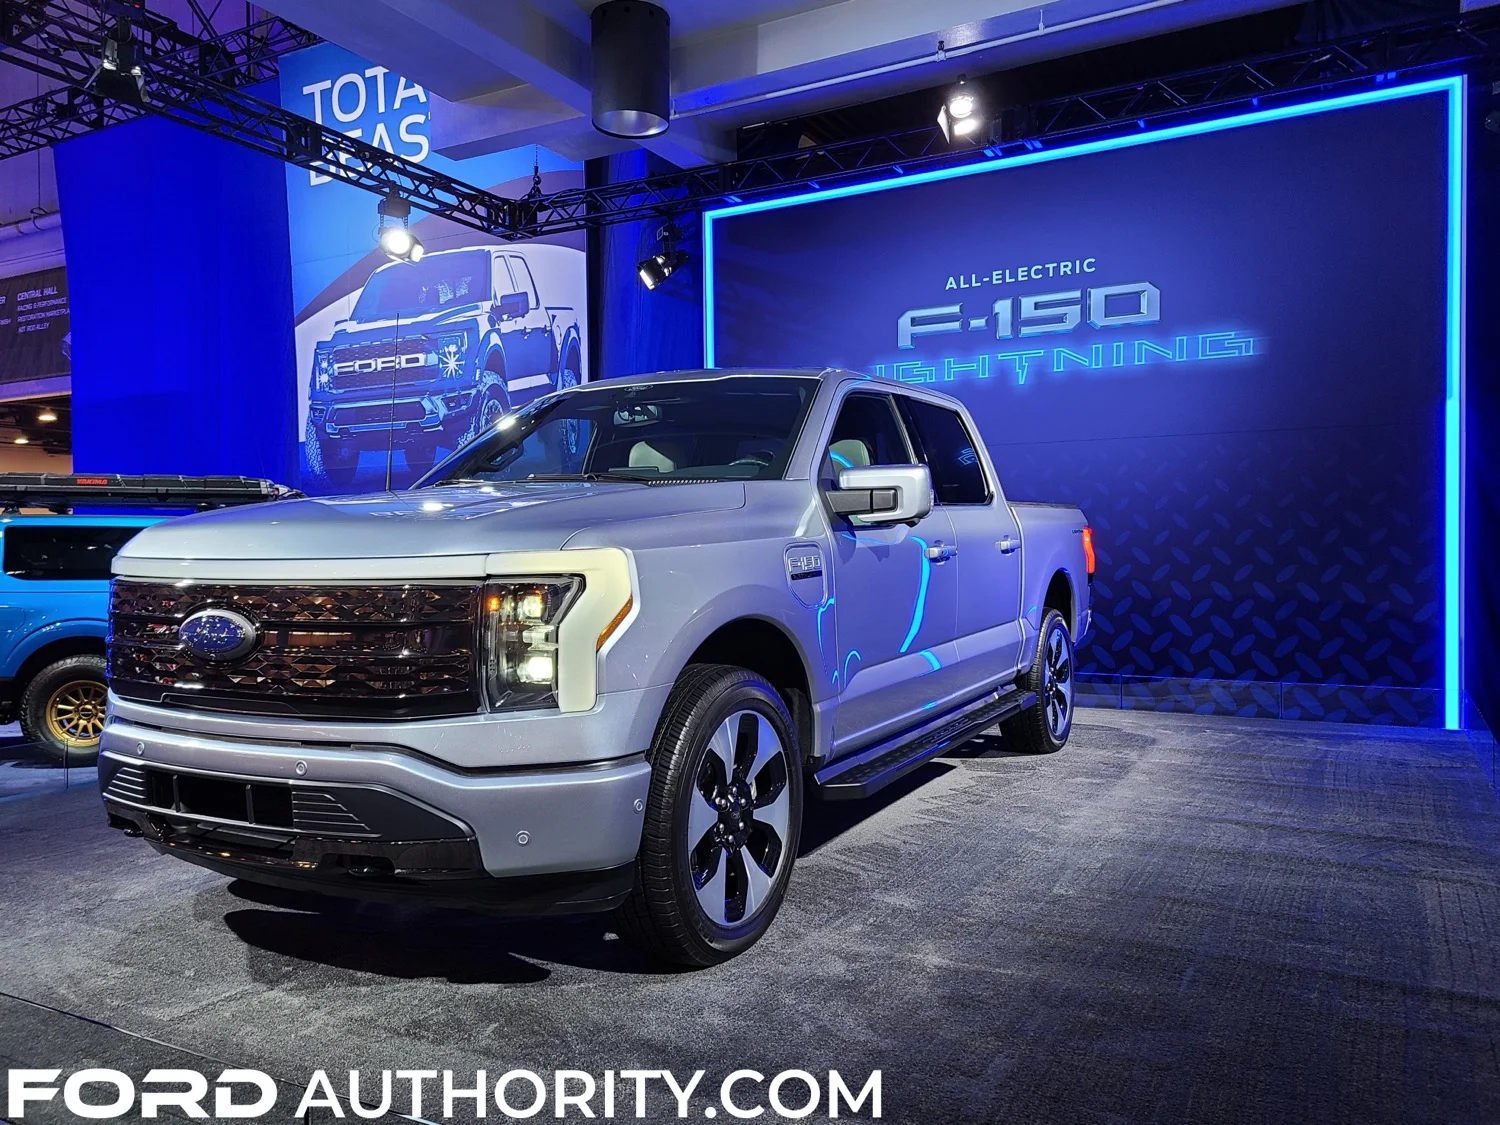 2022 Ford F 150 Lightning Front And Rear Skid Plates Come Standard